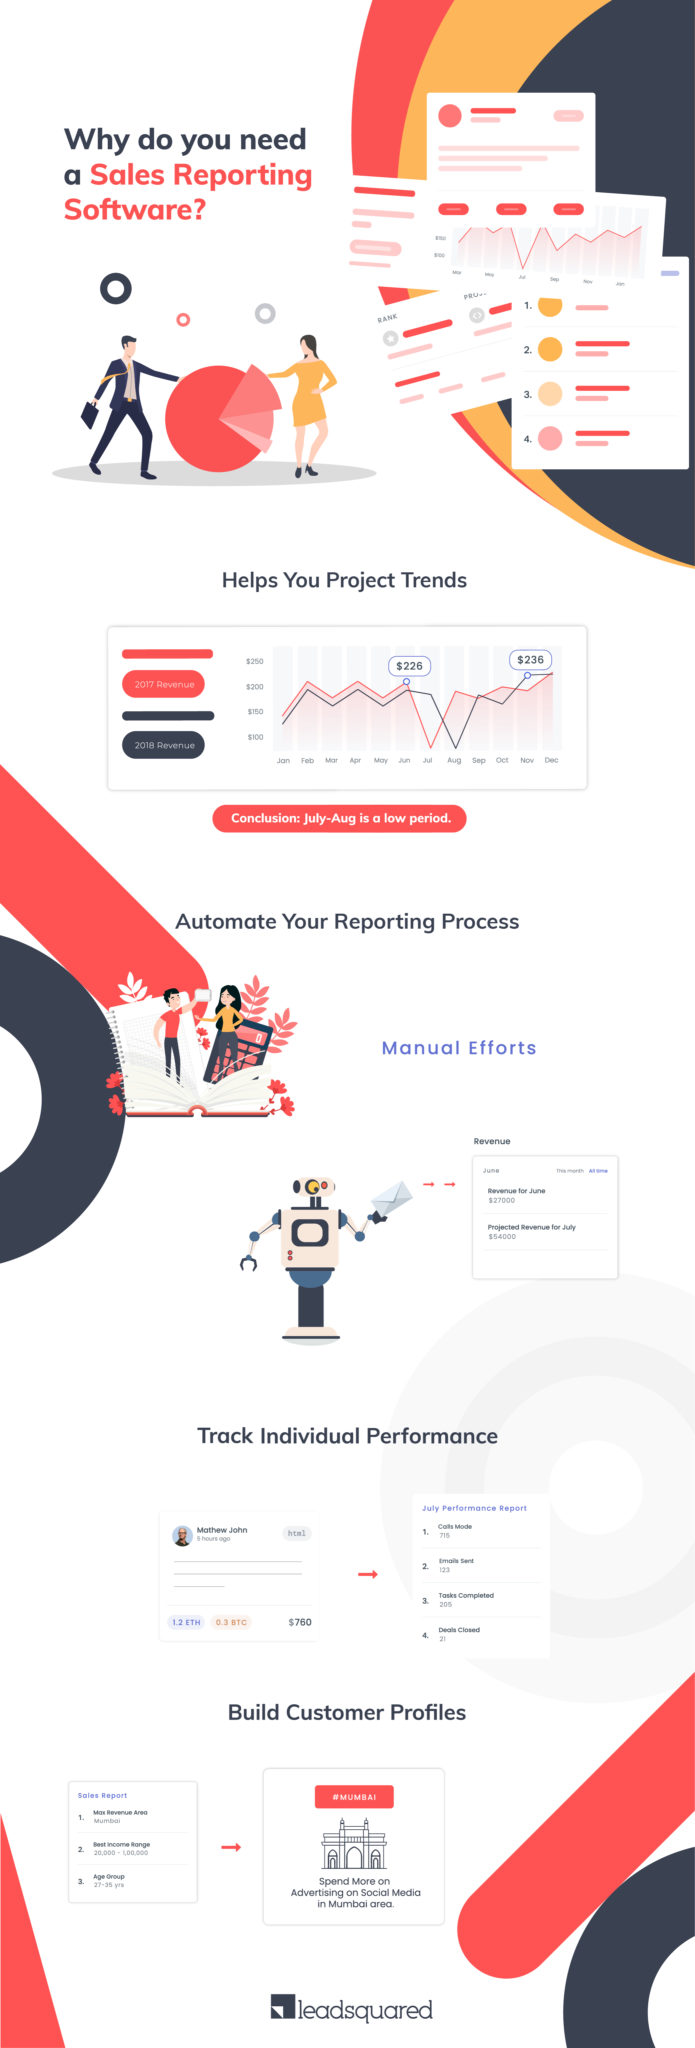 Sales Reporting Software - infographic